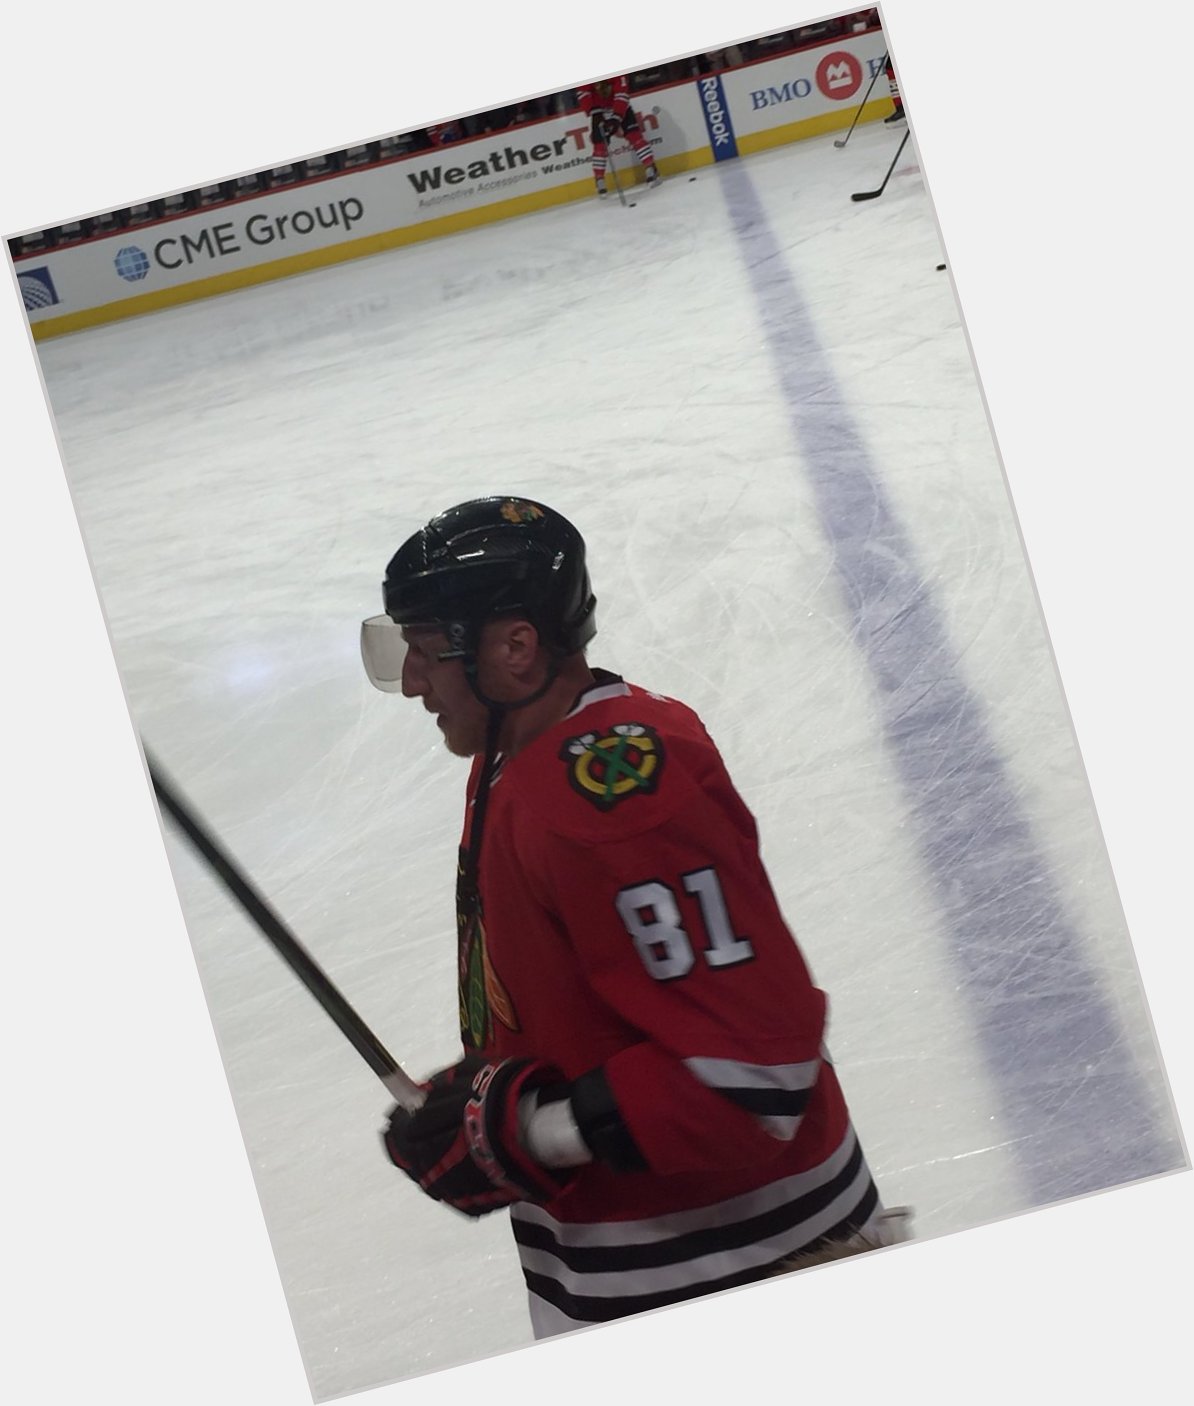 Happy 39th birthday to Marian Hossa! Get better soon and get back in the game...I miss you! 